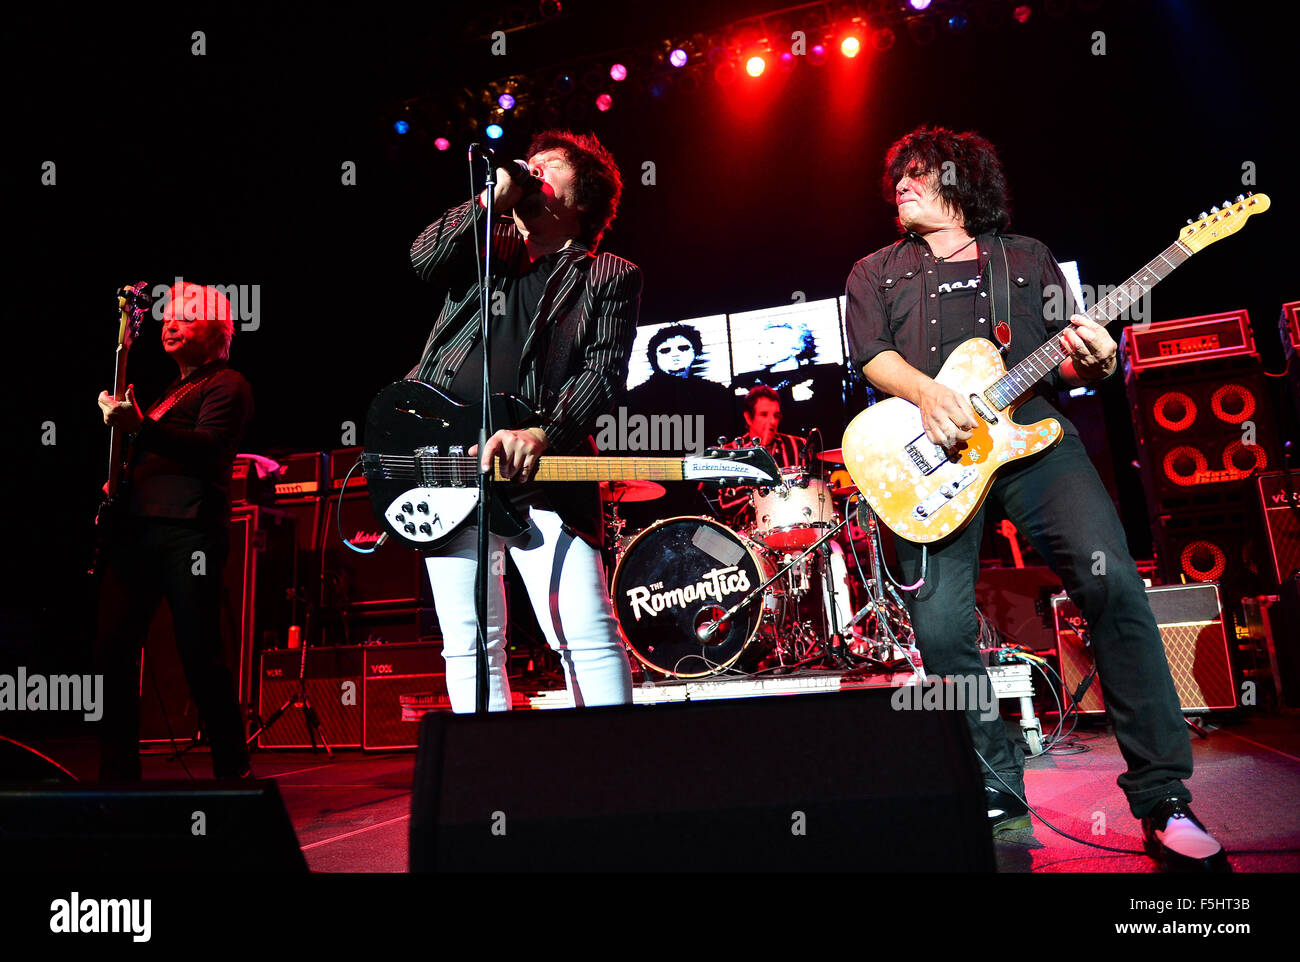 The Romantics performing at Hard Rock Live! in the Seminole Hard Rock Hotel & Casino  Featuring: Rich Cole, Wally Palmar, Brad Elvis, Mike Skill Where: Hollywood, Florida, United States When: 03 Sep 2015 Stock Photo